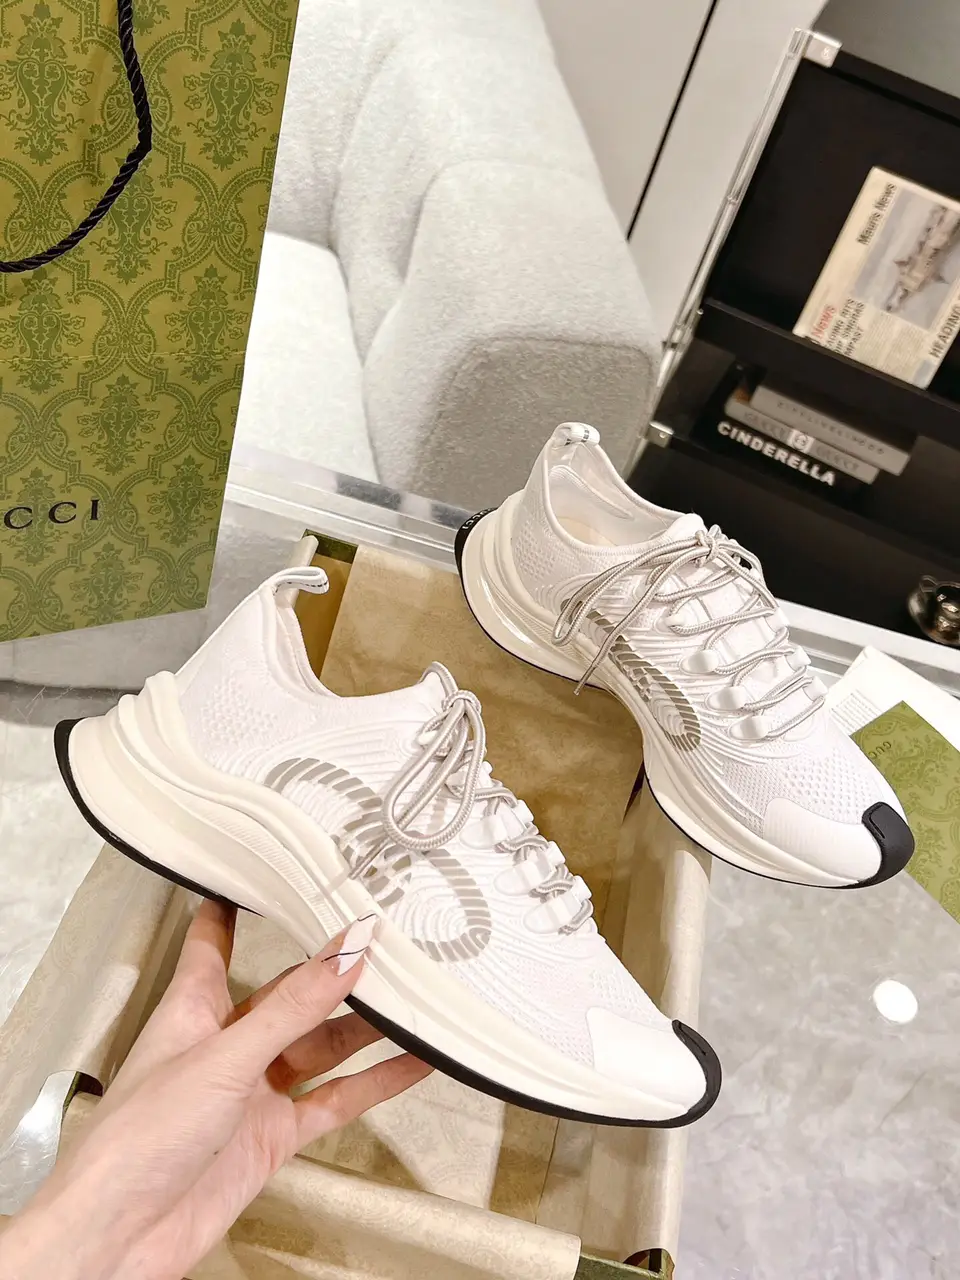 Gucci plain k sports shoes so perfect🥰🥰🥰, Gallery posted by Lisa💖